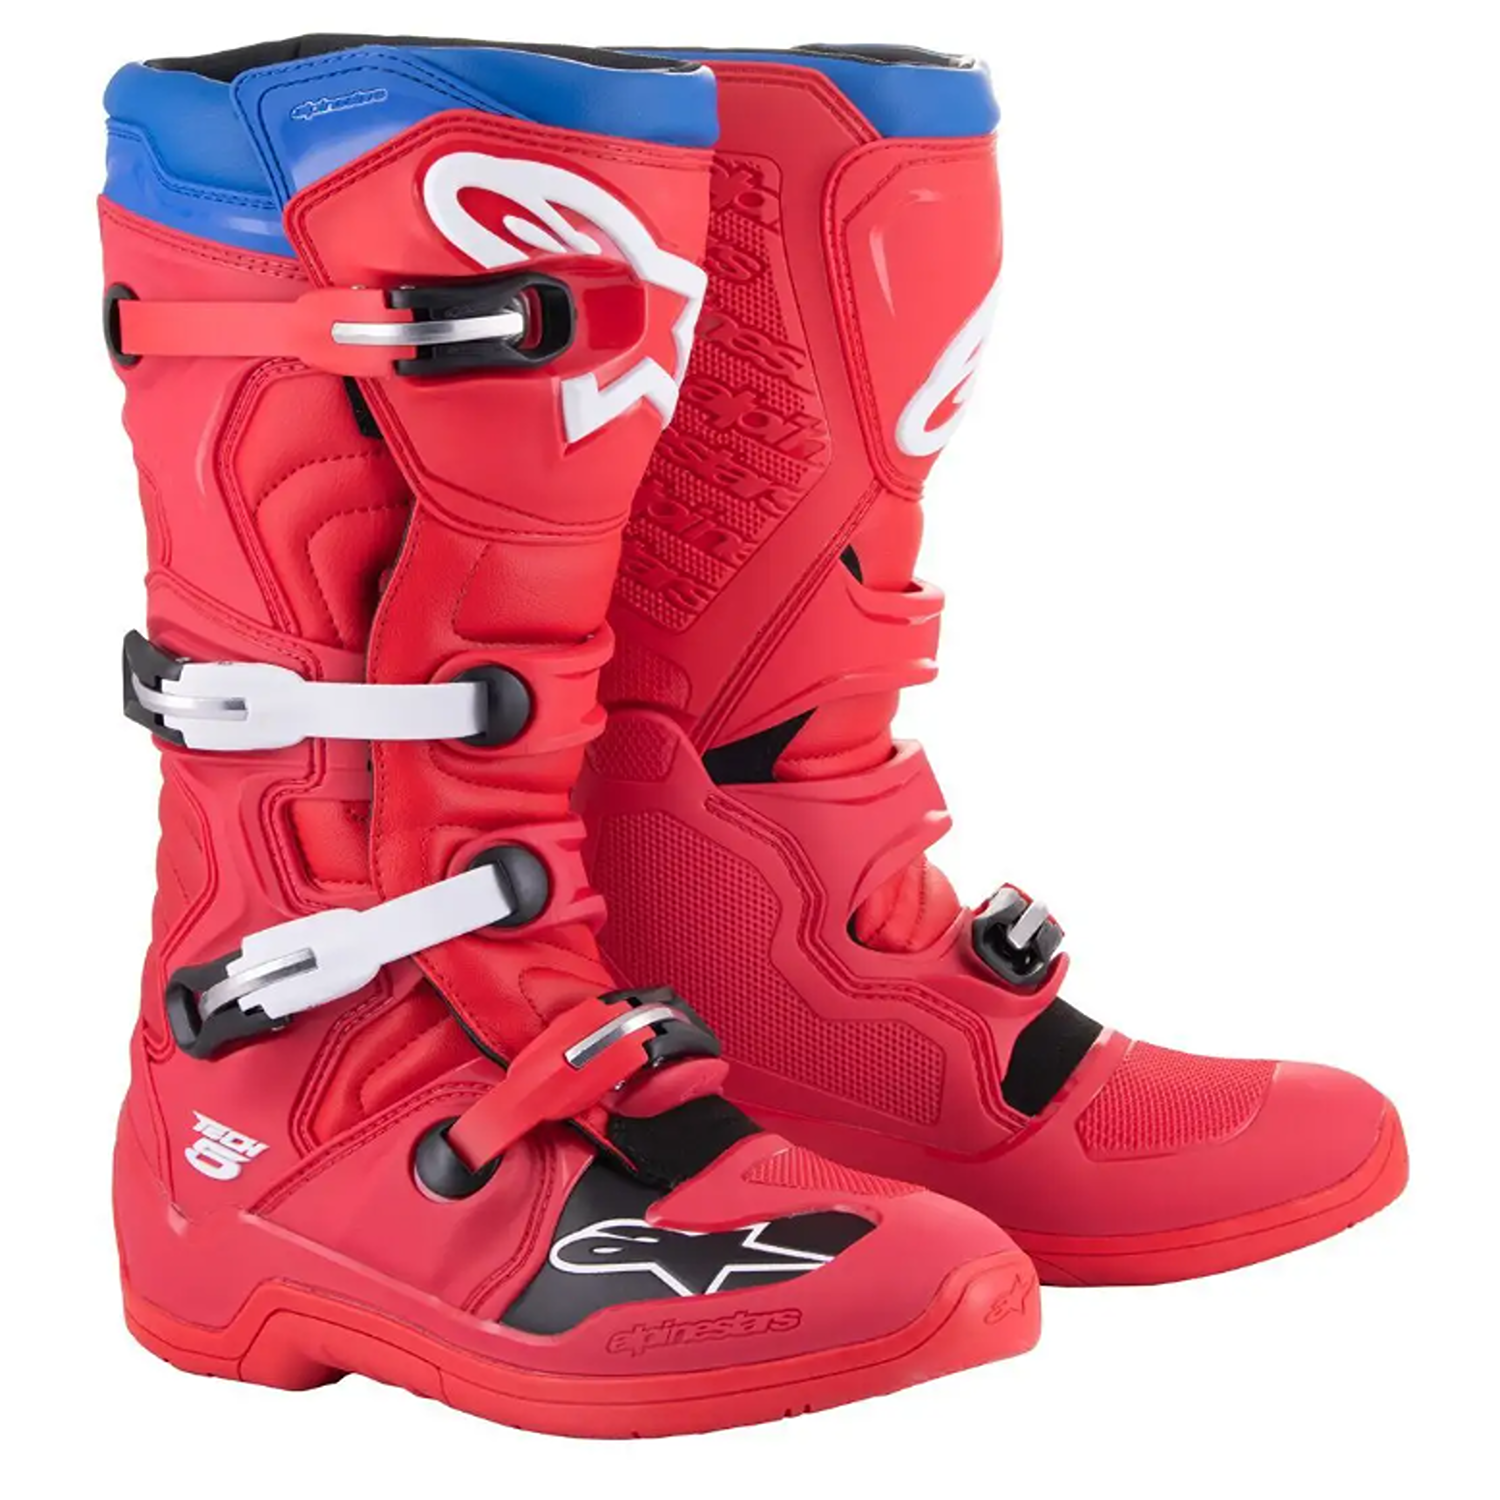 Image of Alpinestars Tech 5 Boots Bright Red Dark Red Blue Taille US 5